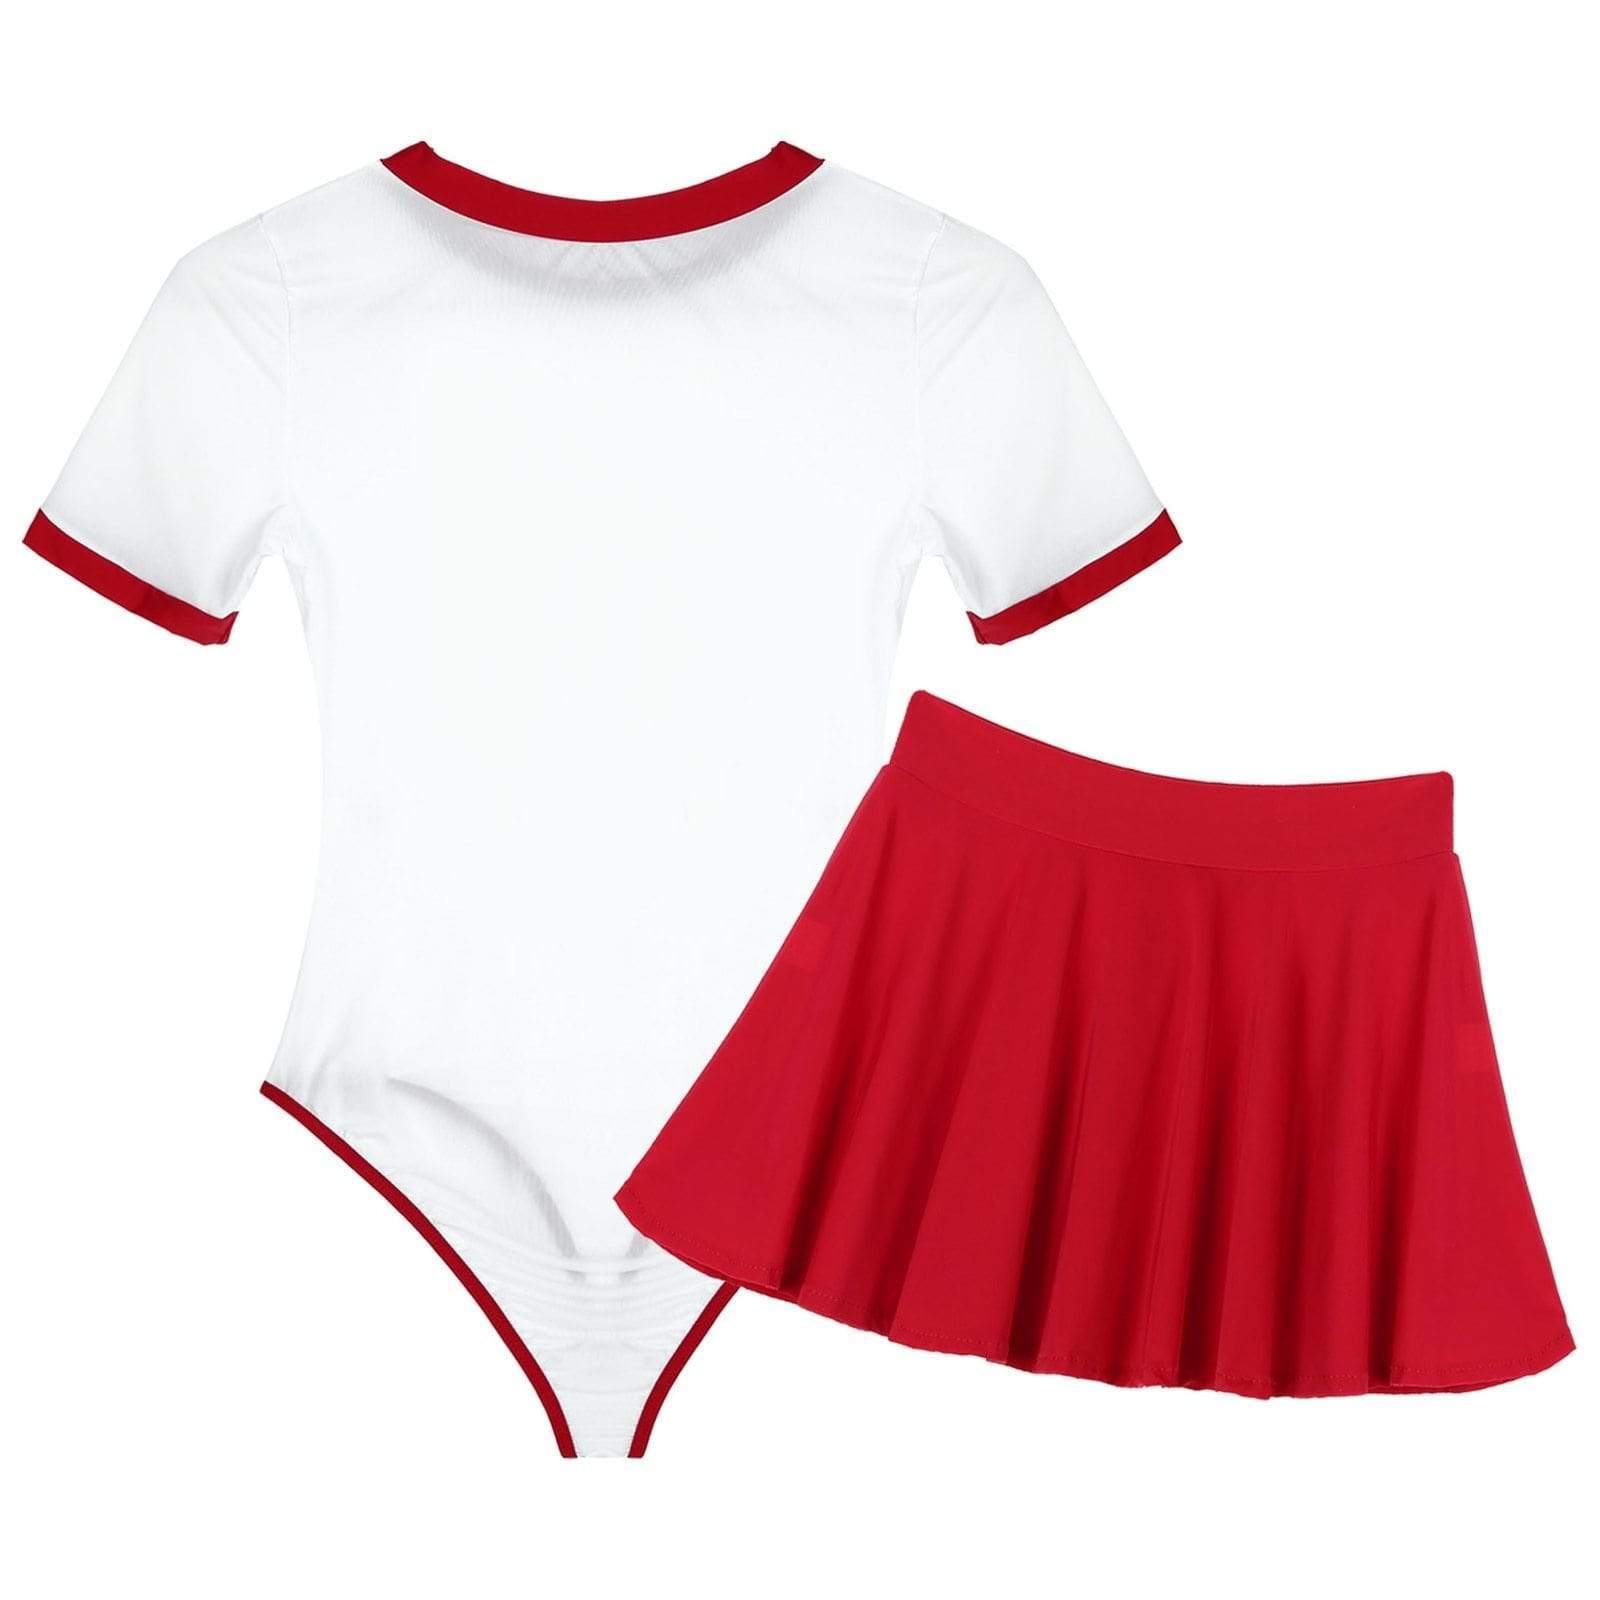 Kinky Cloth 200003986 Cheerleader Lingerie See-Through Outfit